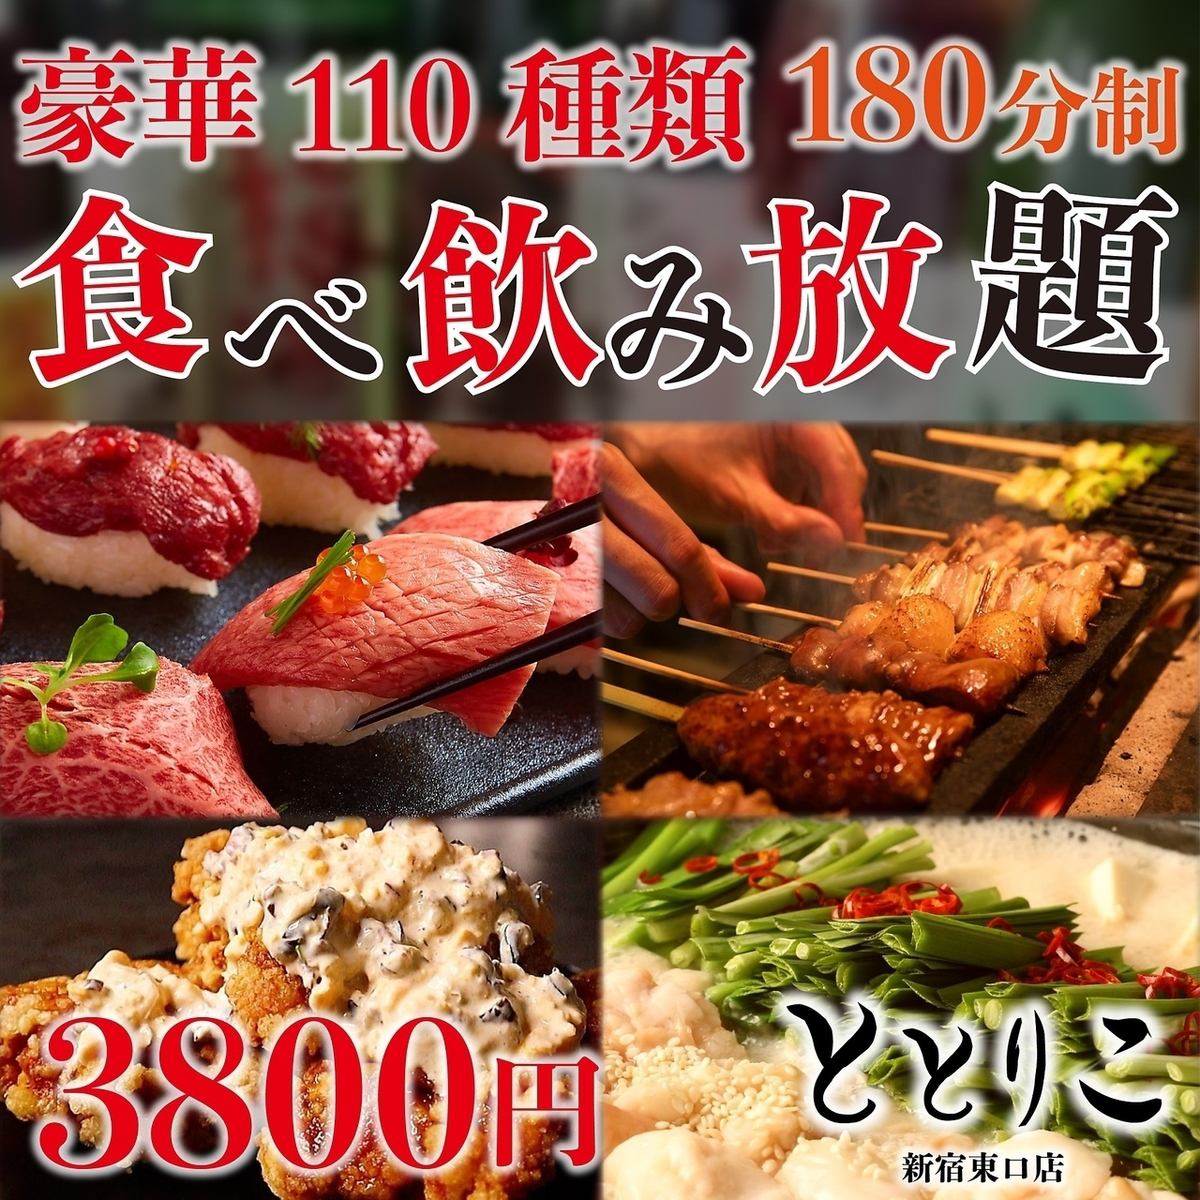 All-you-can-eat and drink for 3 hours in a private room! A restaurant where you can enjoy fresh fish♪